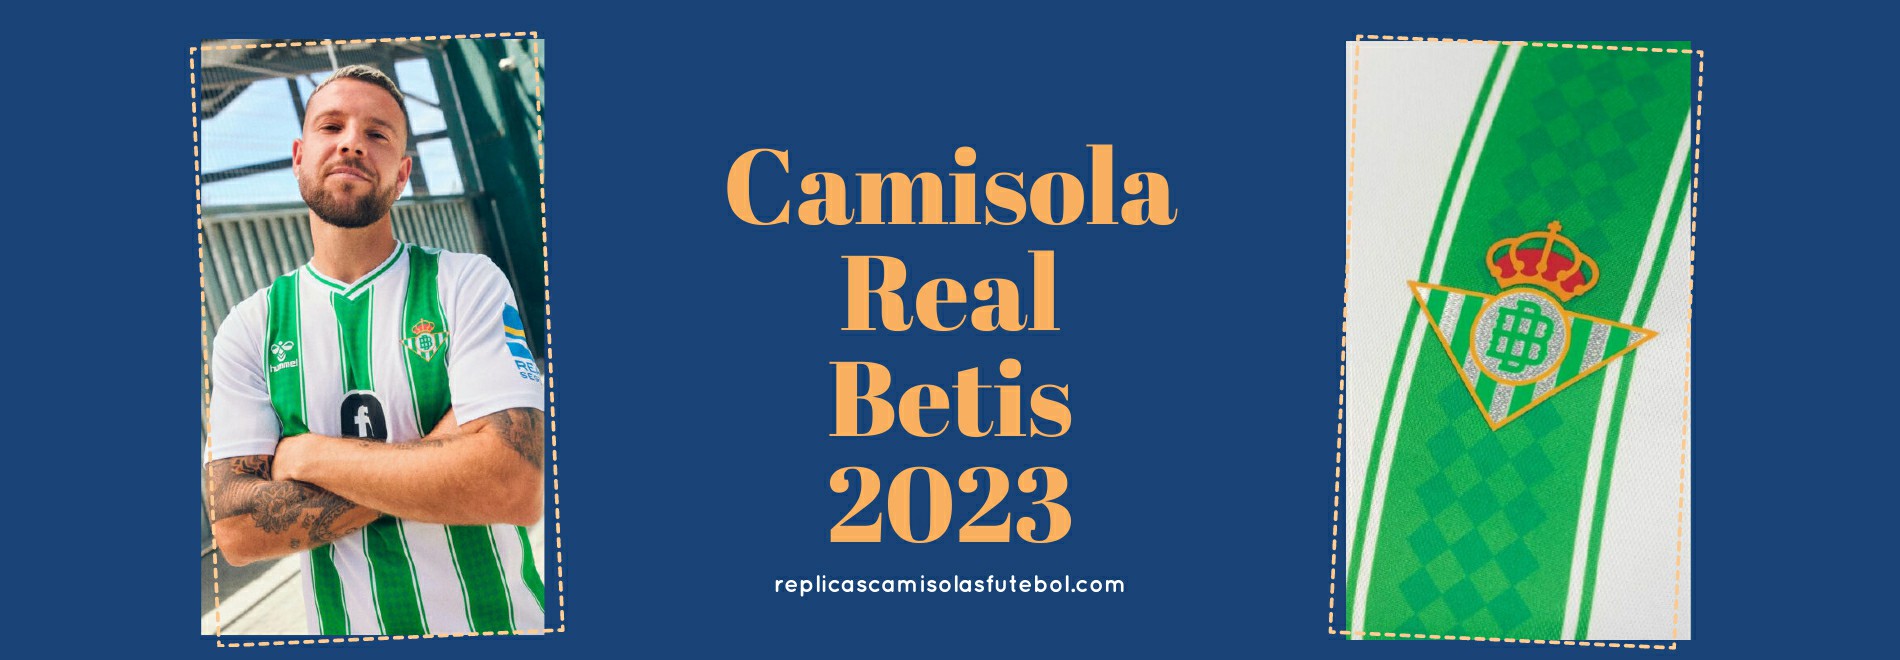 Camisola Real Betis 2023-2024